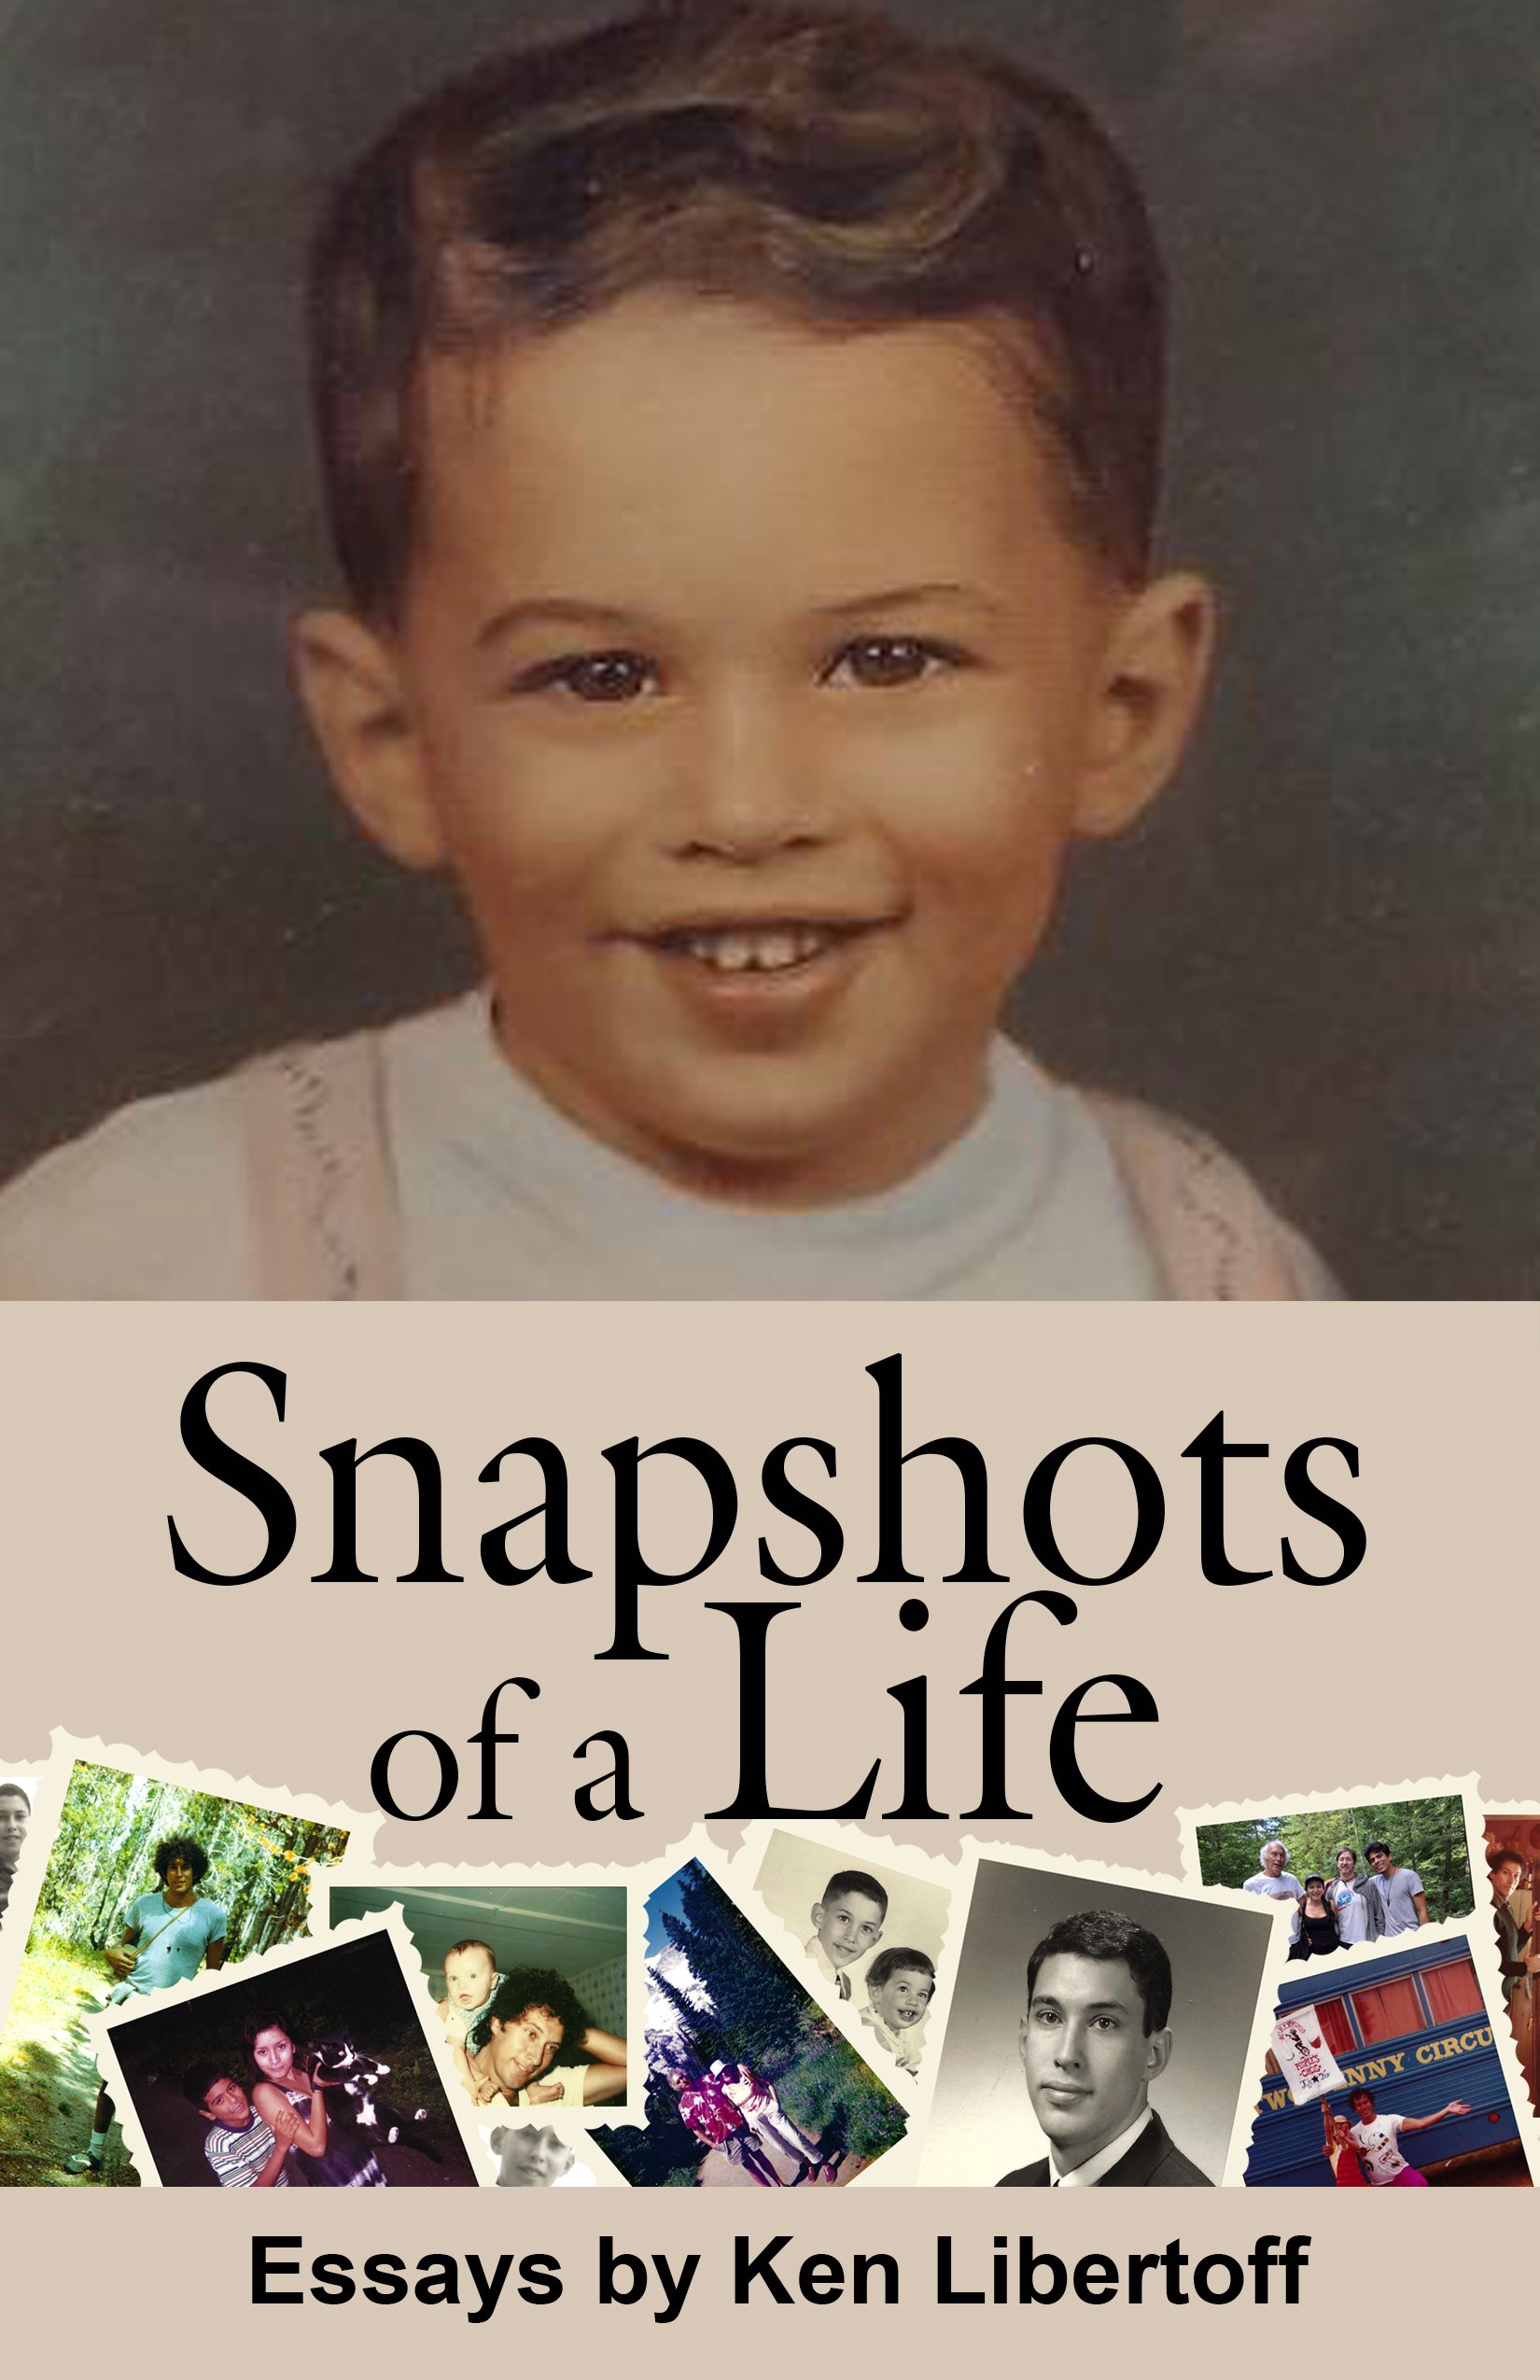 Why you should buy Snapshots of Our Life on